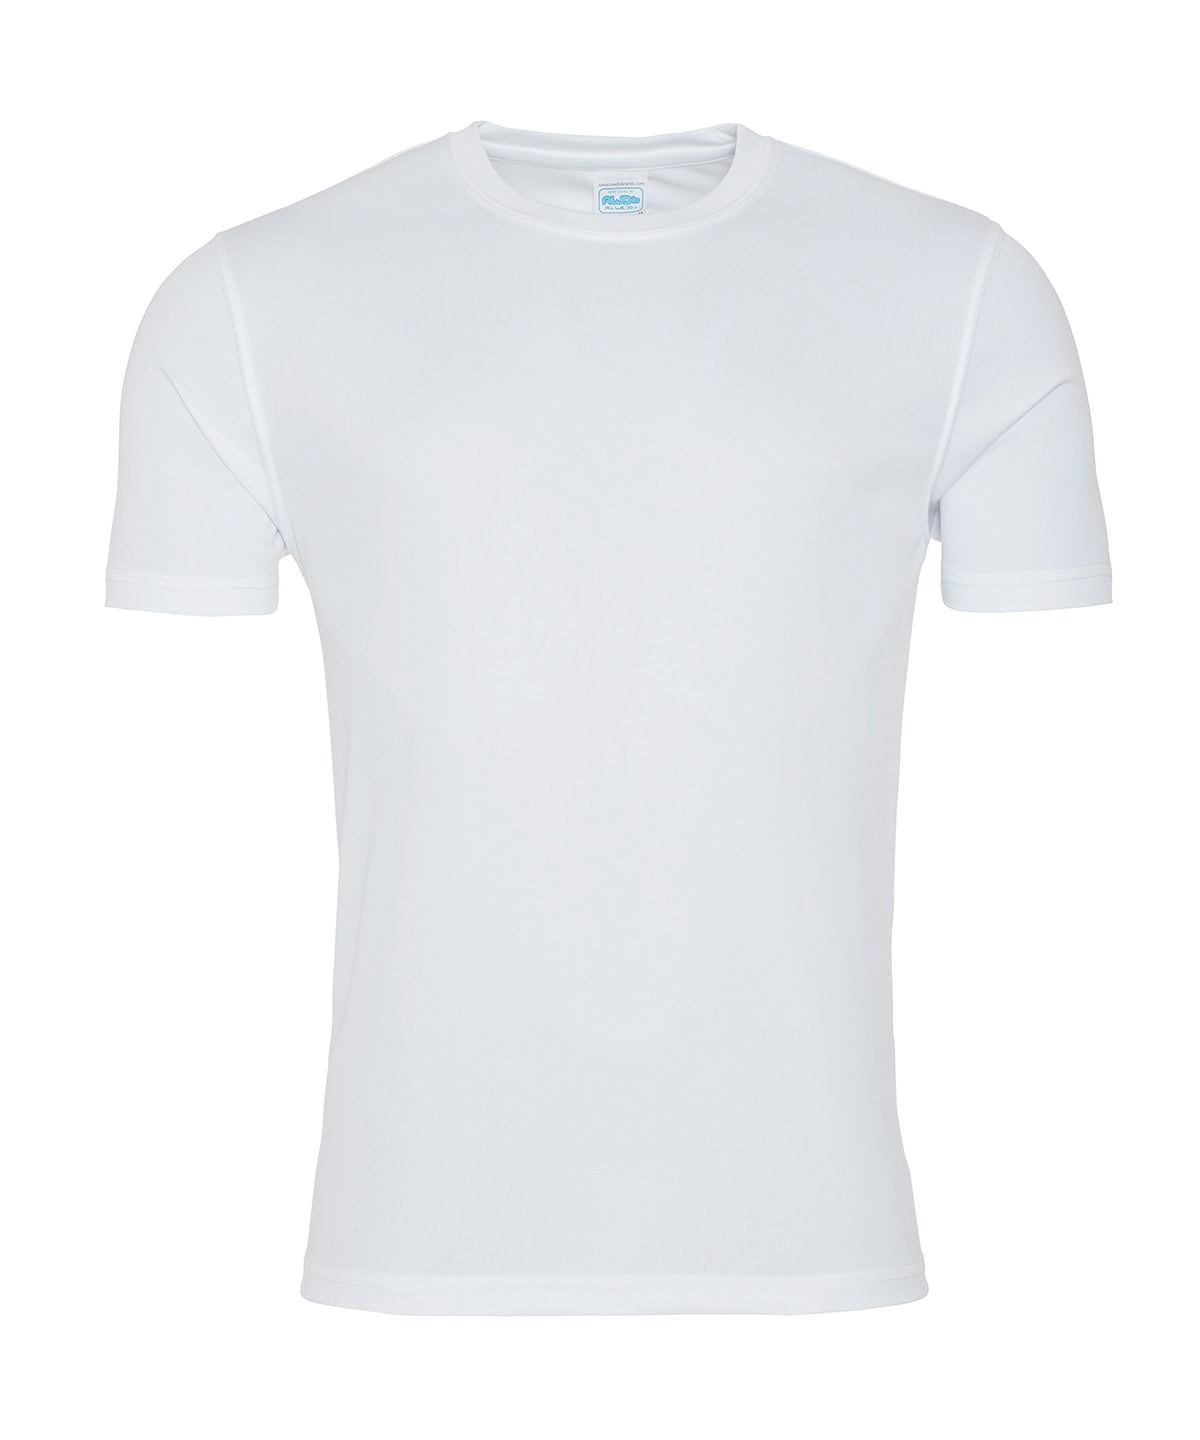 Personalised T-Shirts - White AWDis Just Cool Cool smooth T